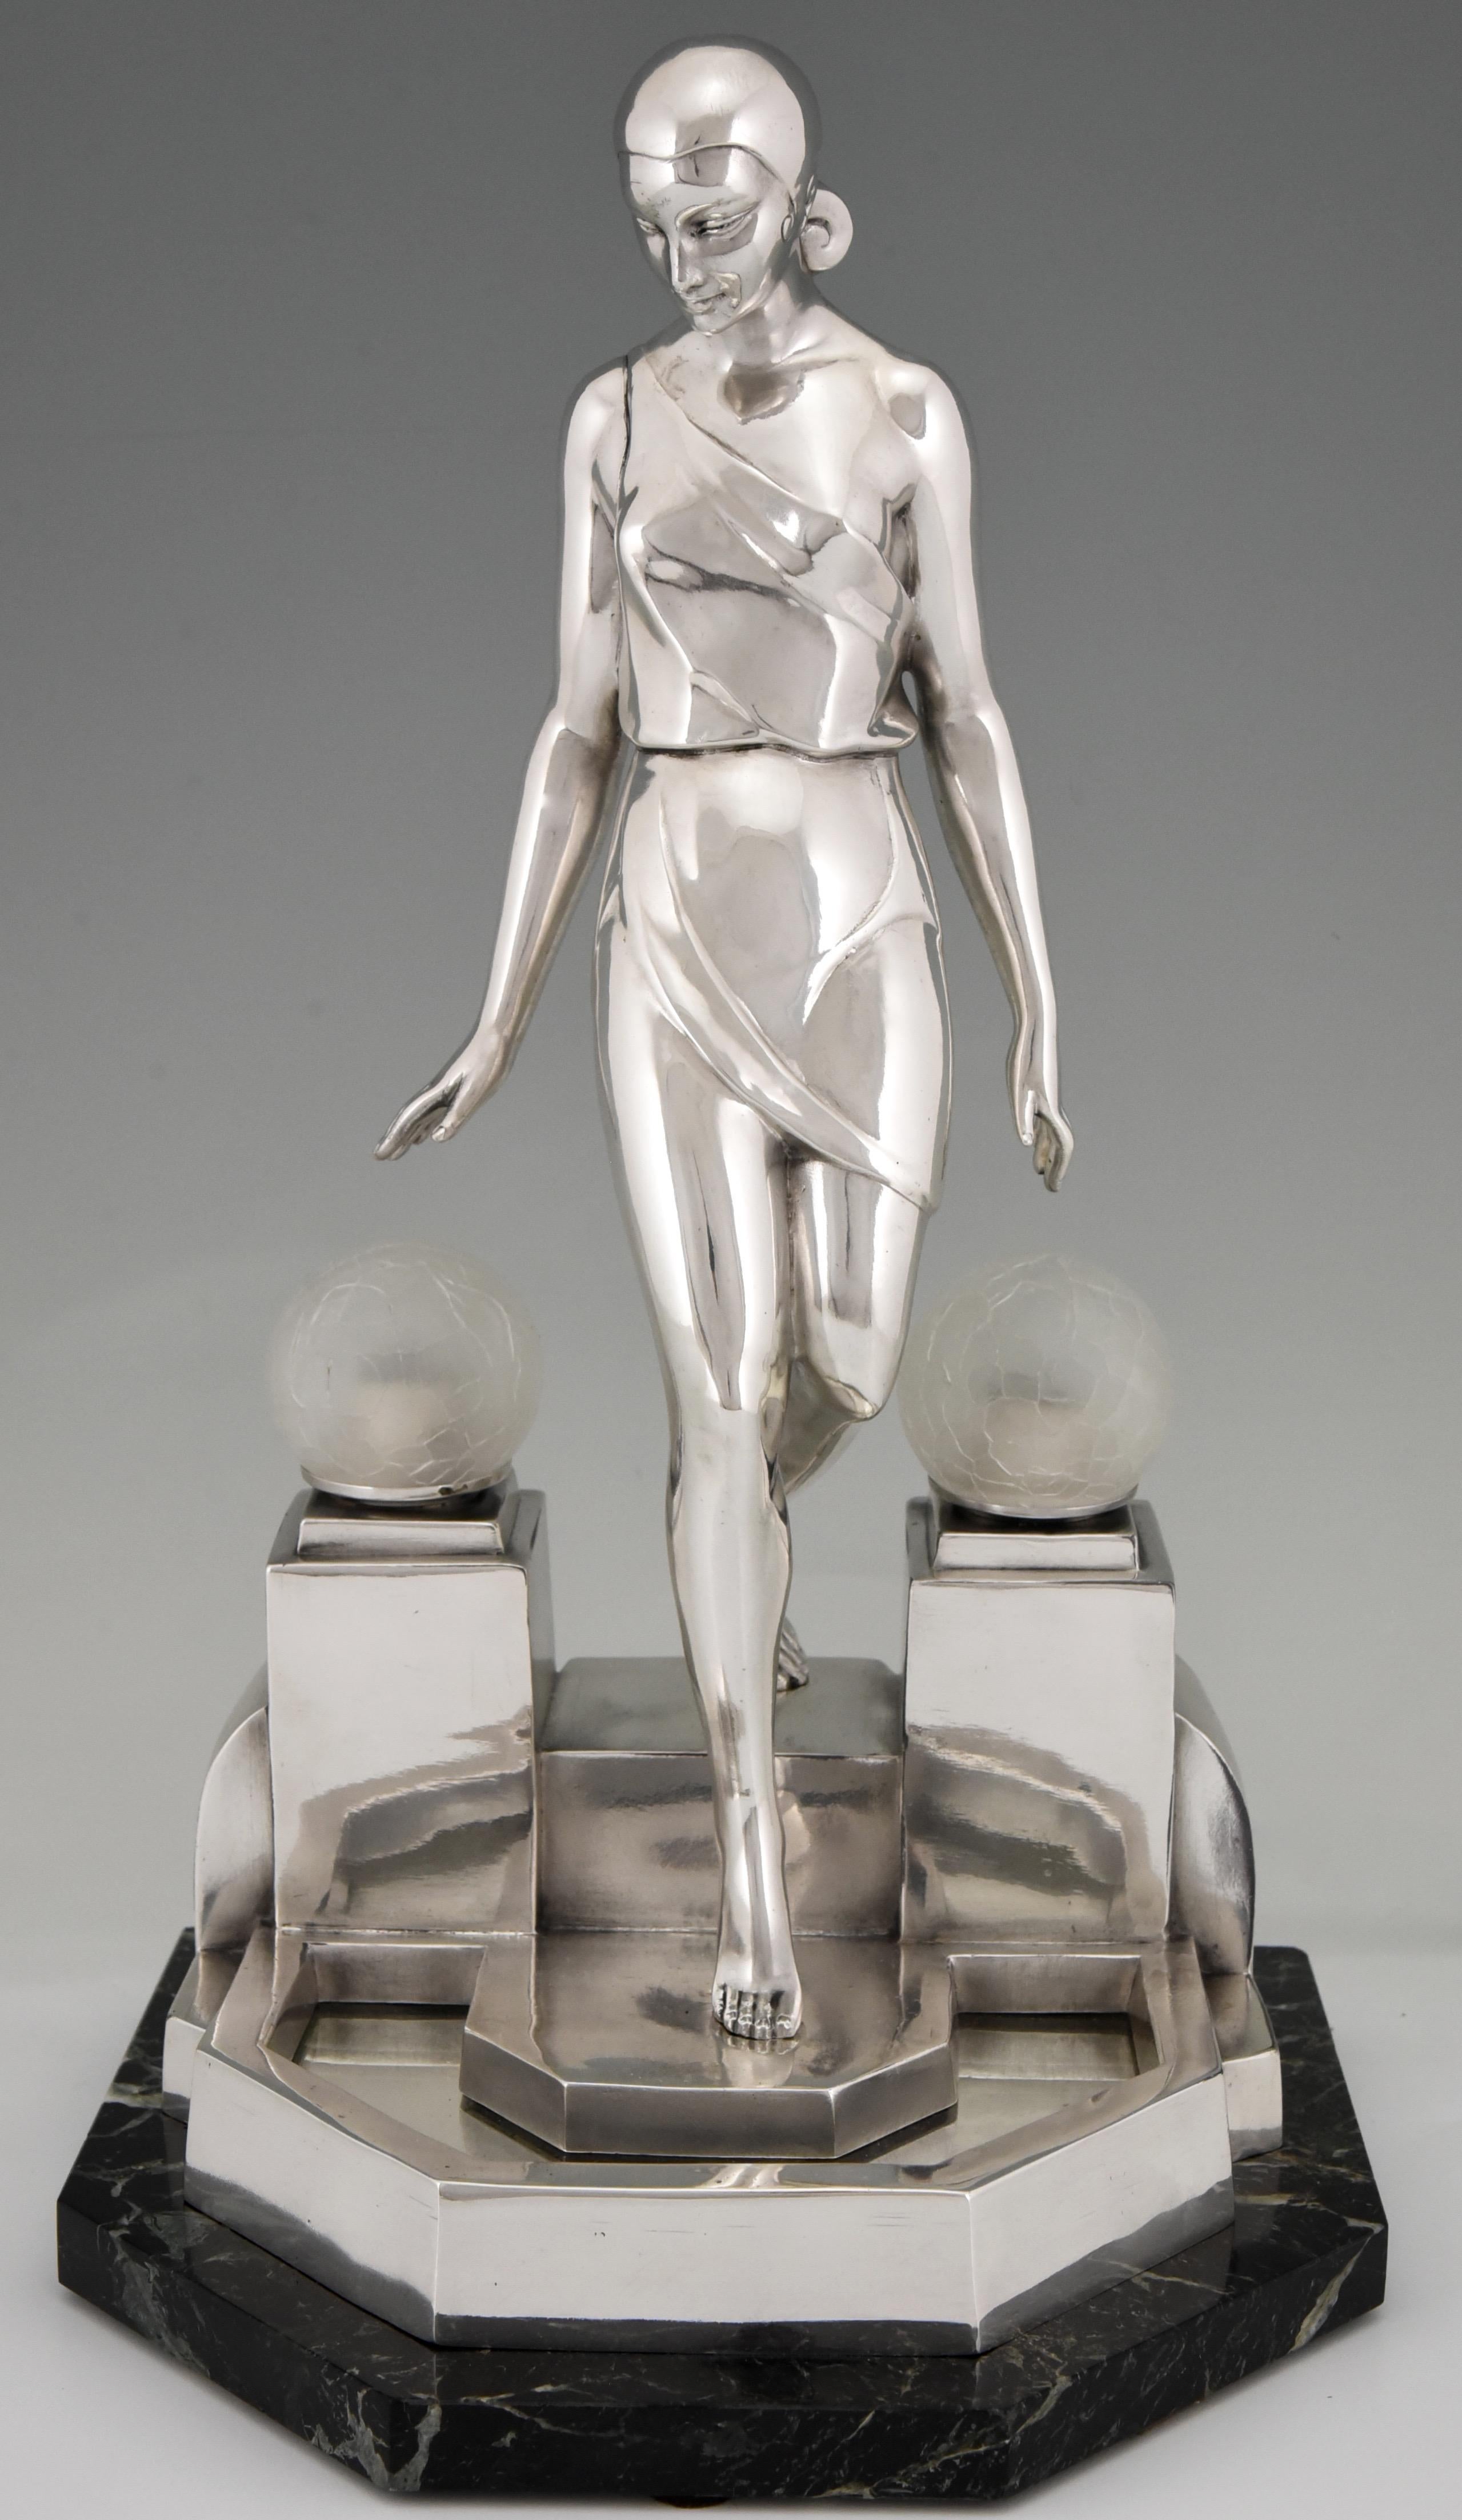 Stylish Art Deco sculptural table lamp by Pierre Le Faguays,
titled Nausicaa.
The lamp is a picturing a woman walking down a fountain, 
The sculpture is signed Fayral for Pierre Le Faguays and was cast by the Le Verrier foundry. The sculpture is